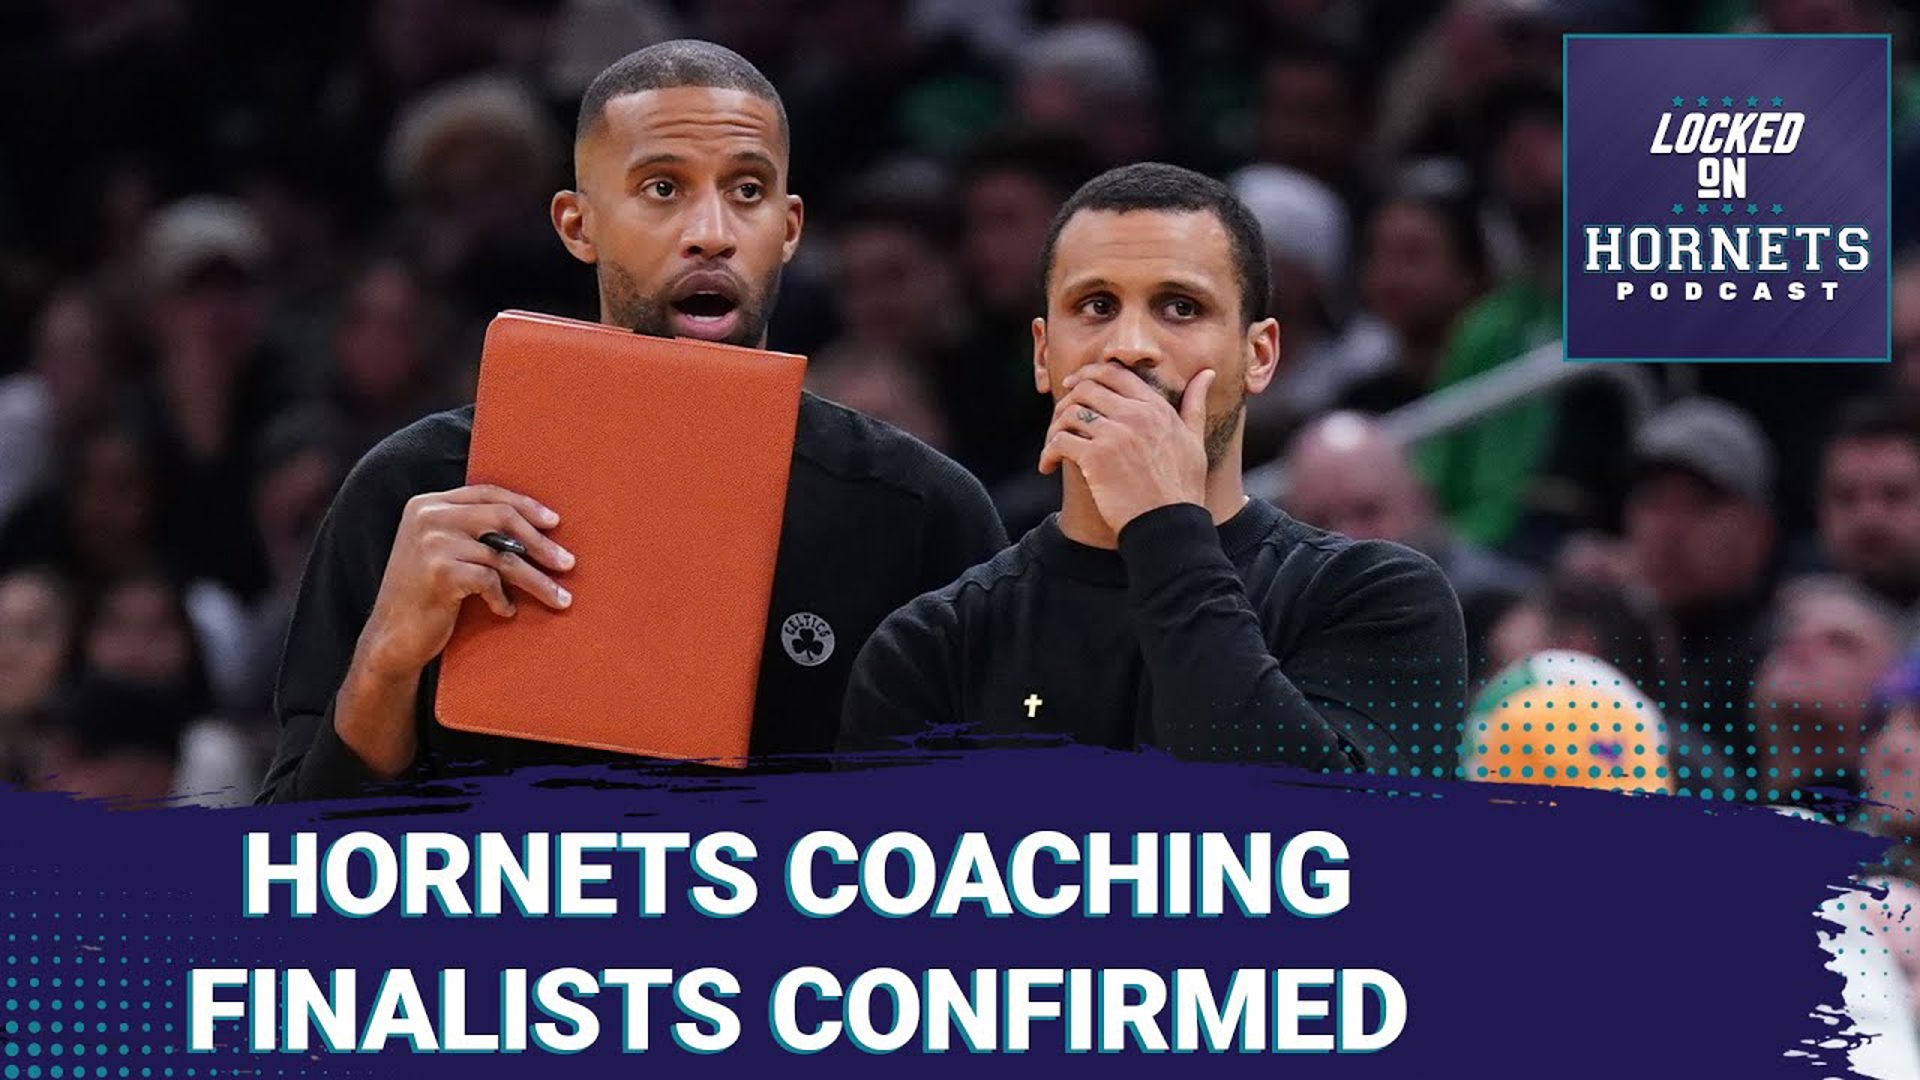 Coaching finalists confirmed? + the Hornets have NOT been on the same page on player injuries